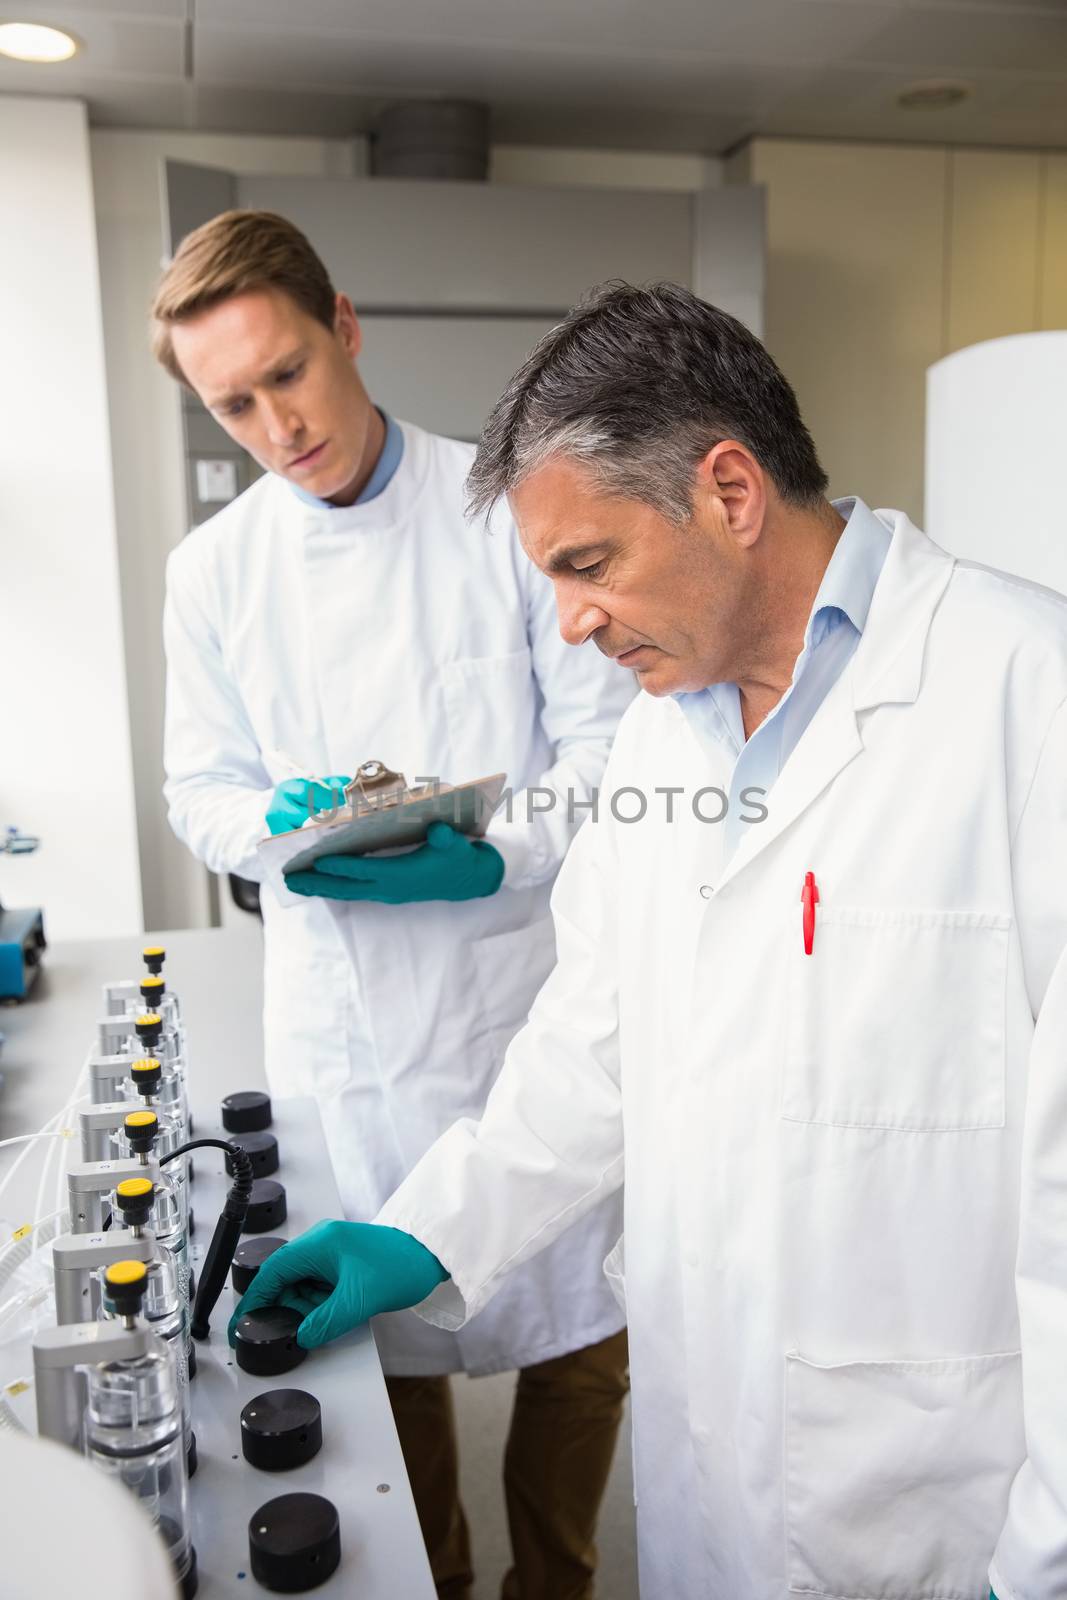 Team of scientists working together  at the laboratory